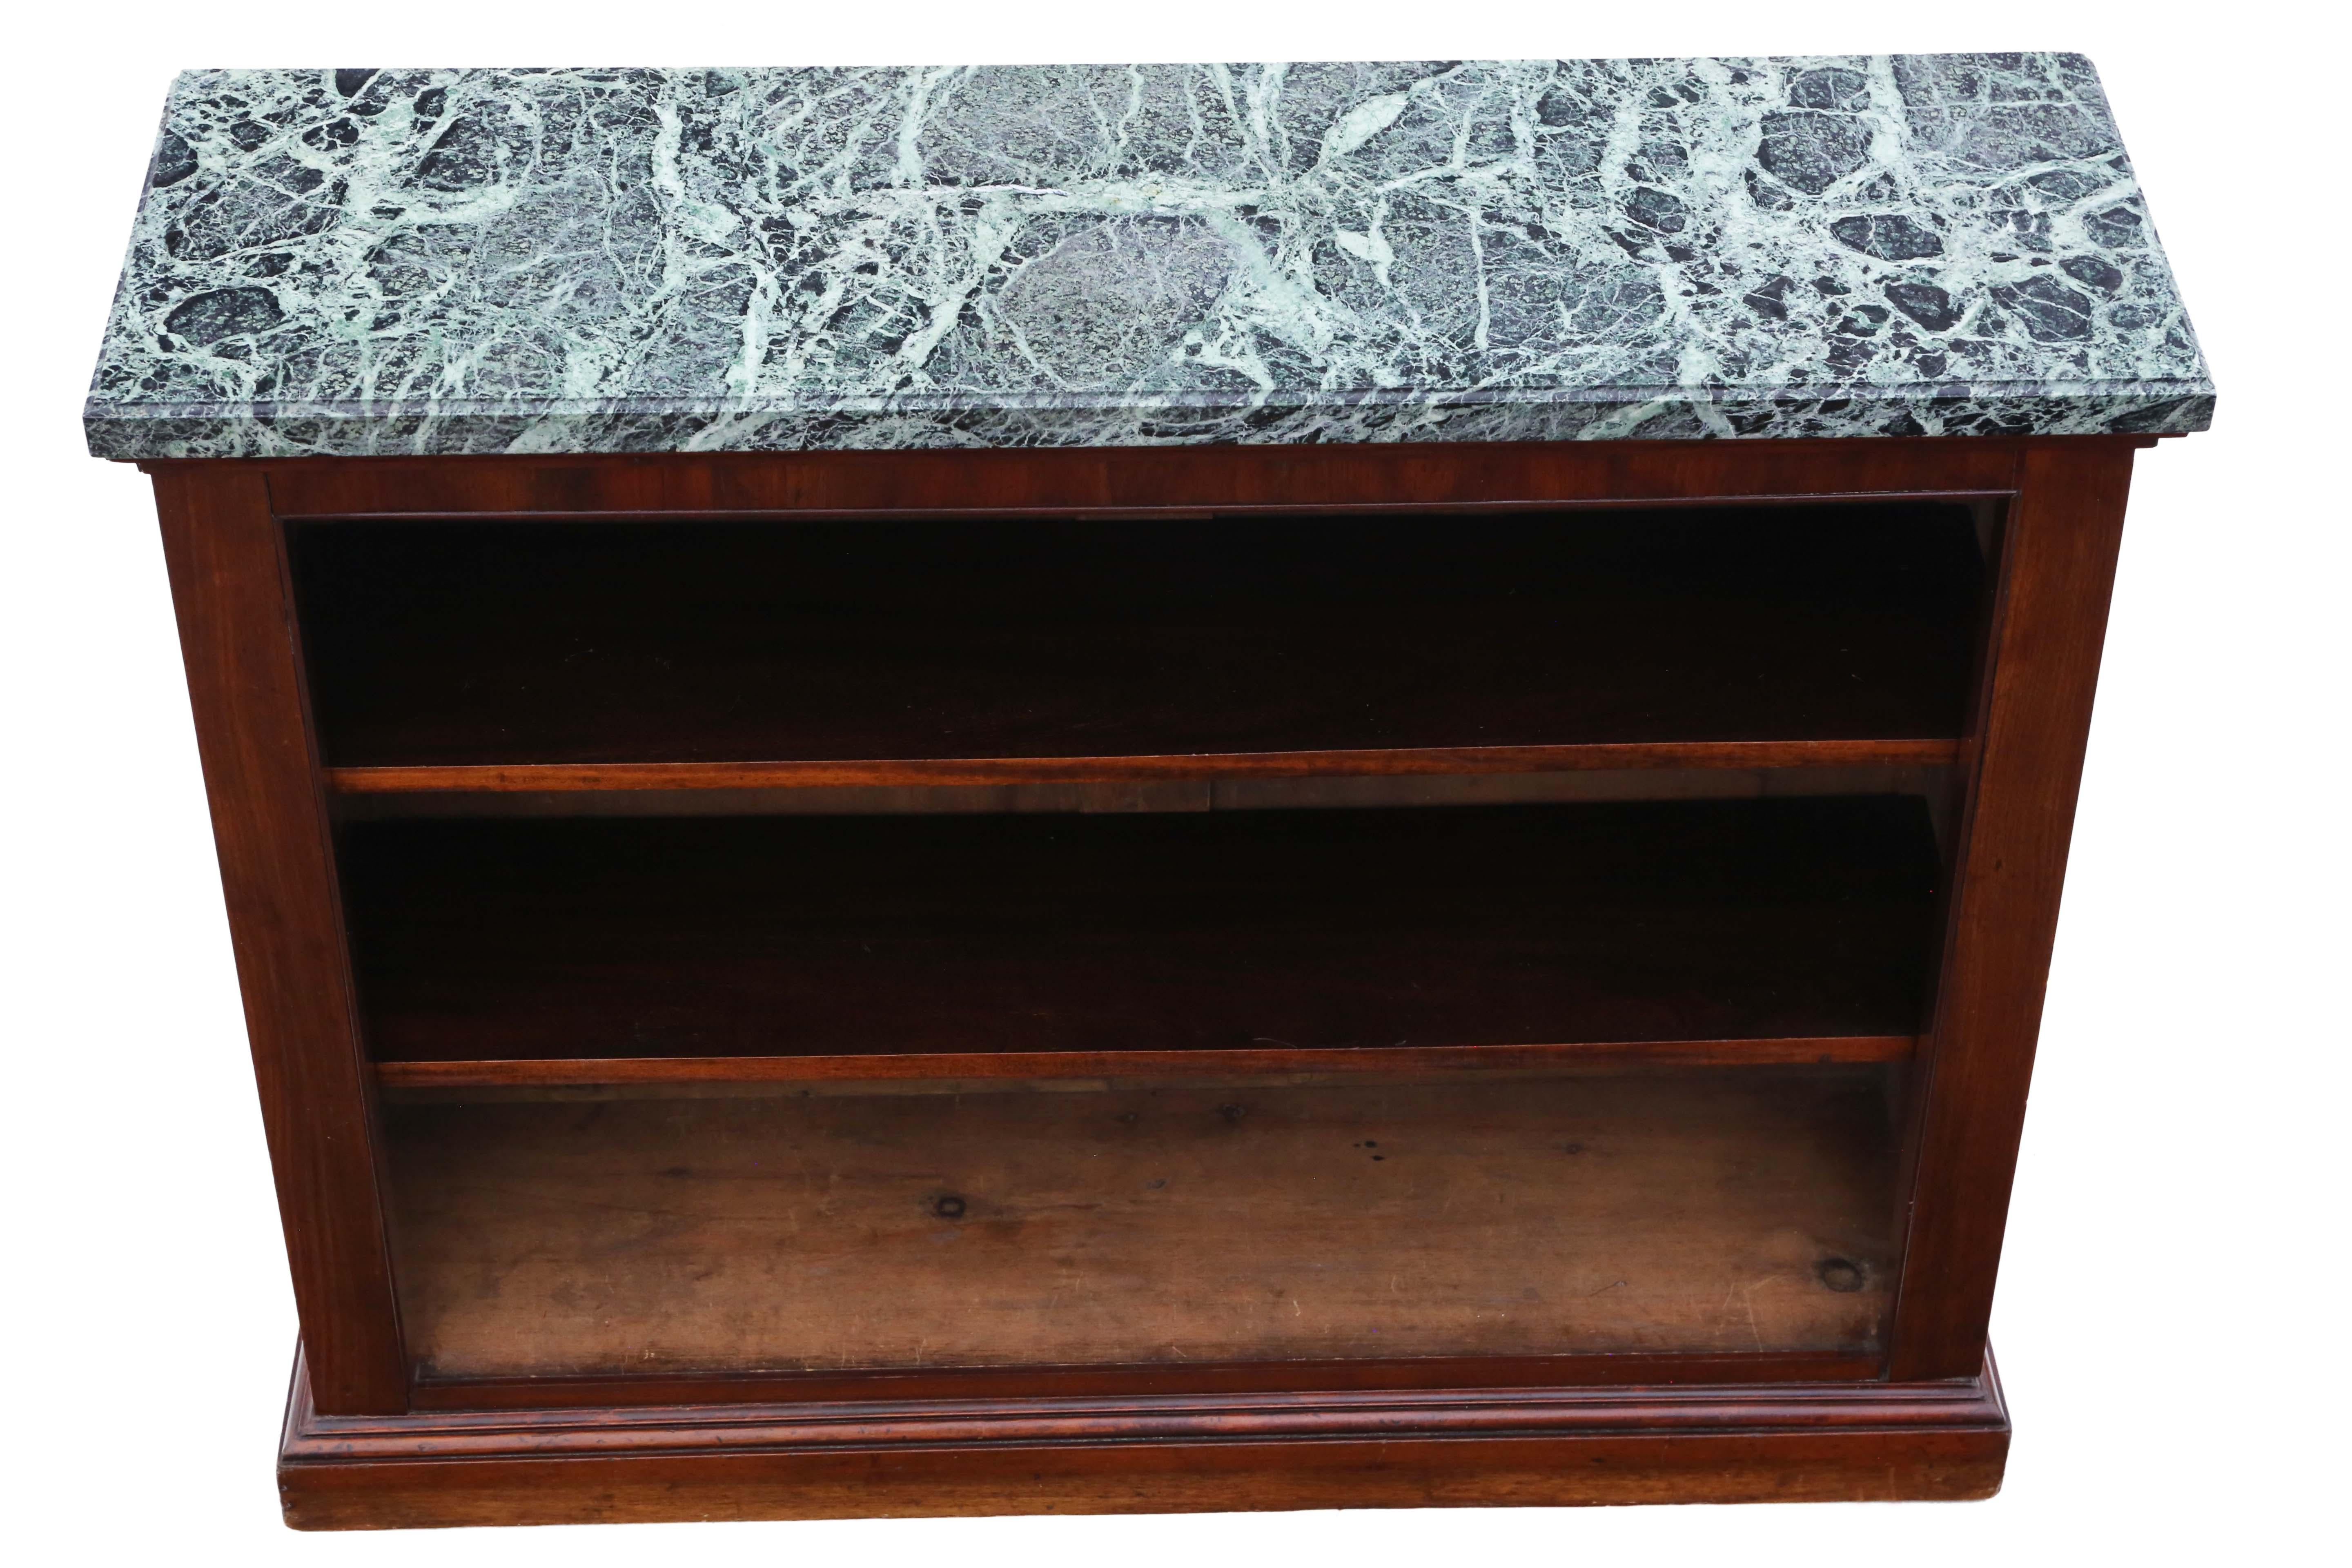  Antique large fine quality 19th Century mahogany and marble bookcase In Good Condition For Sale In Wisbech, Cambridgeshire